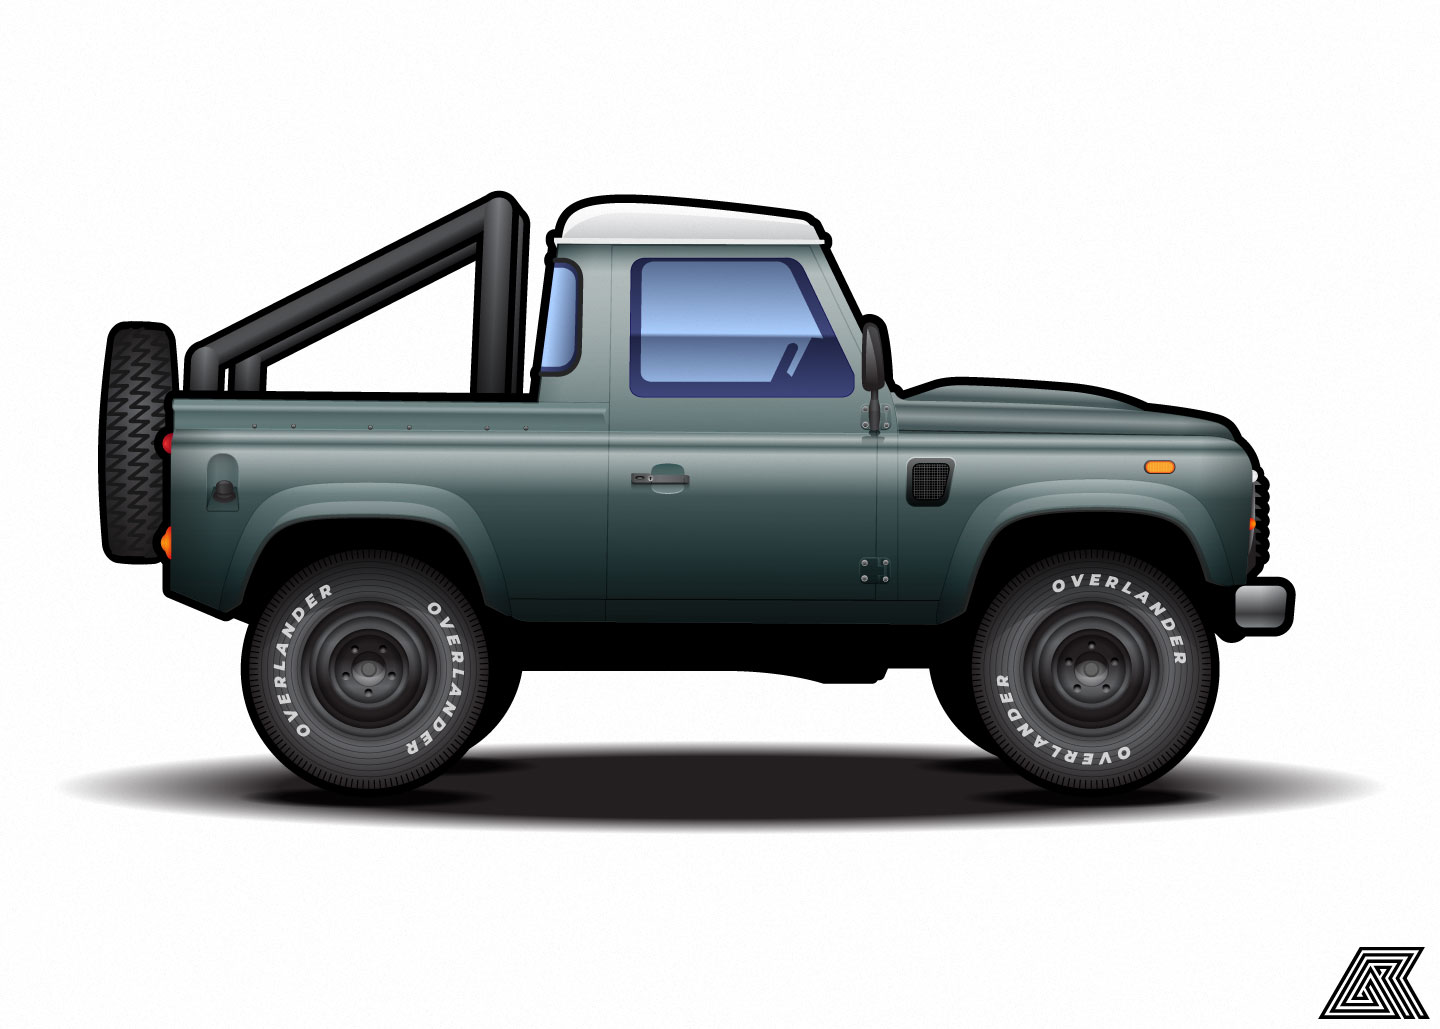 Land Rover Defender 90 pickup variant (with roll-bar)